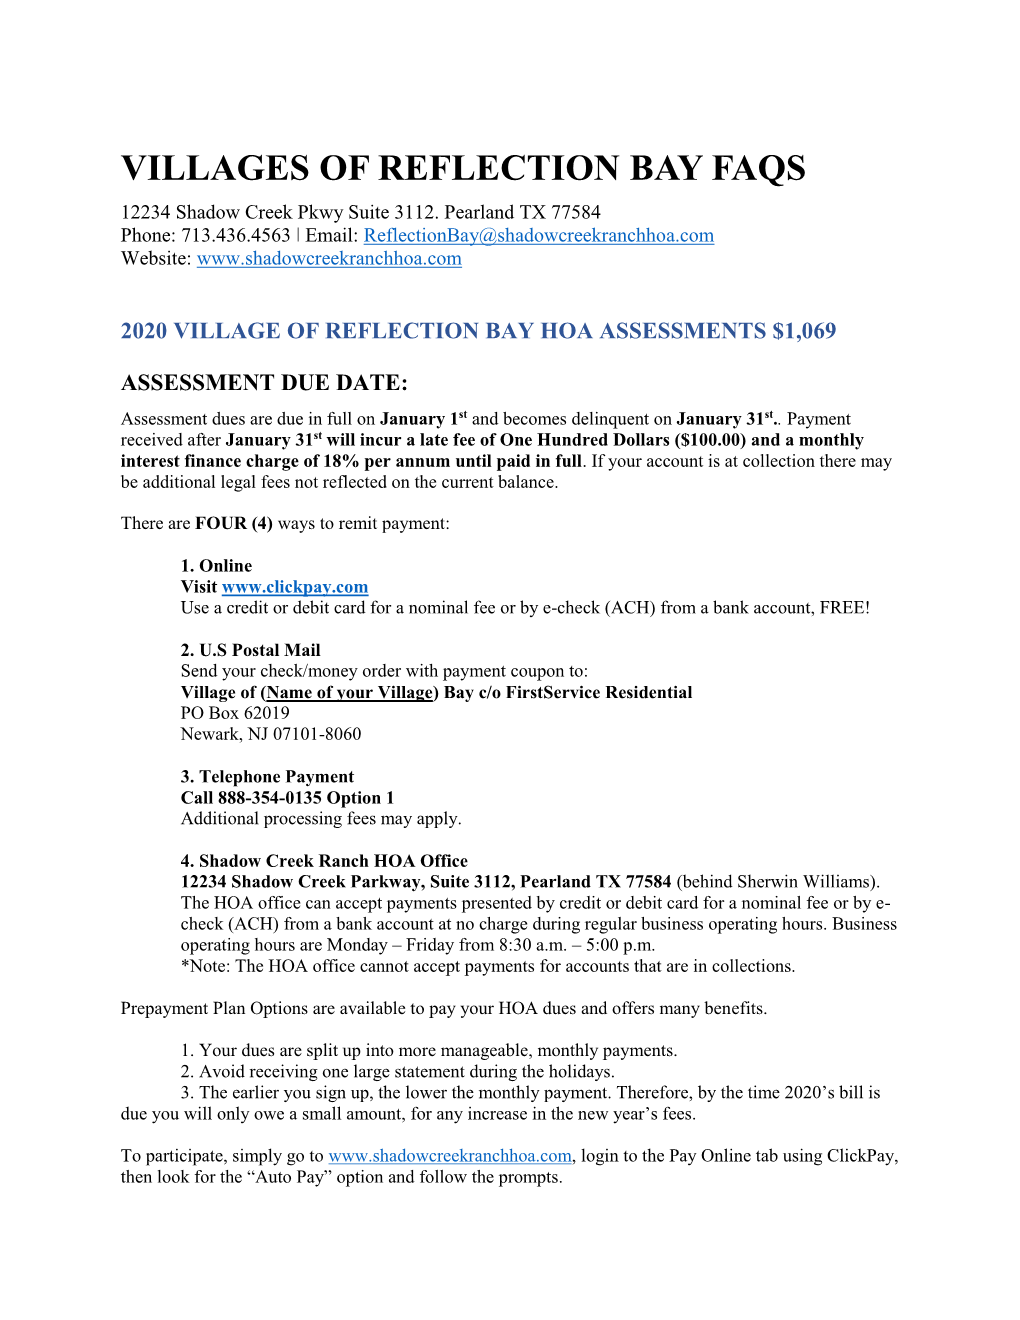 VILLAGES of REFLECTION BAY FAQS 12234 Shadow Creek Pkwy Suite 3112